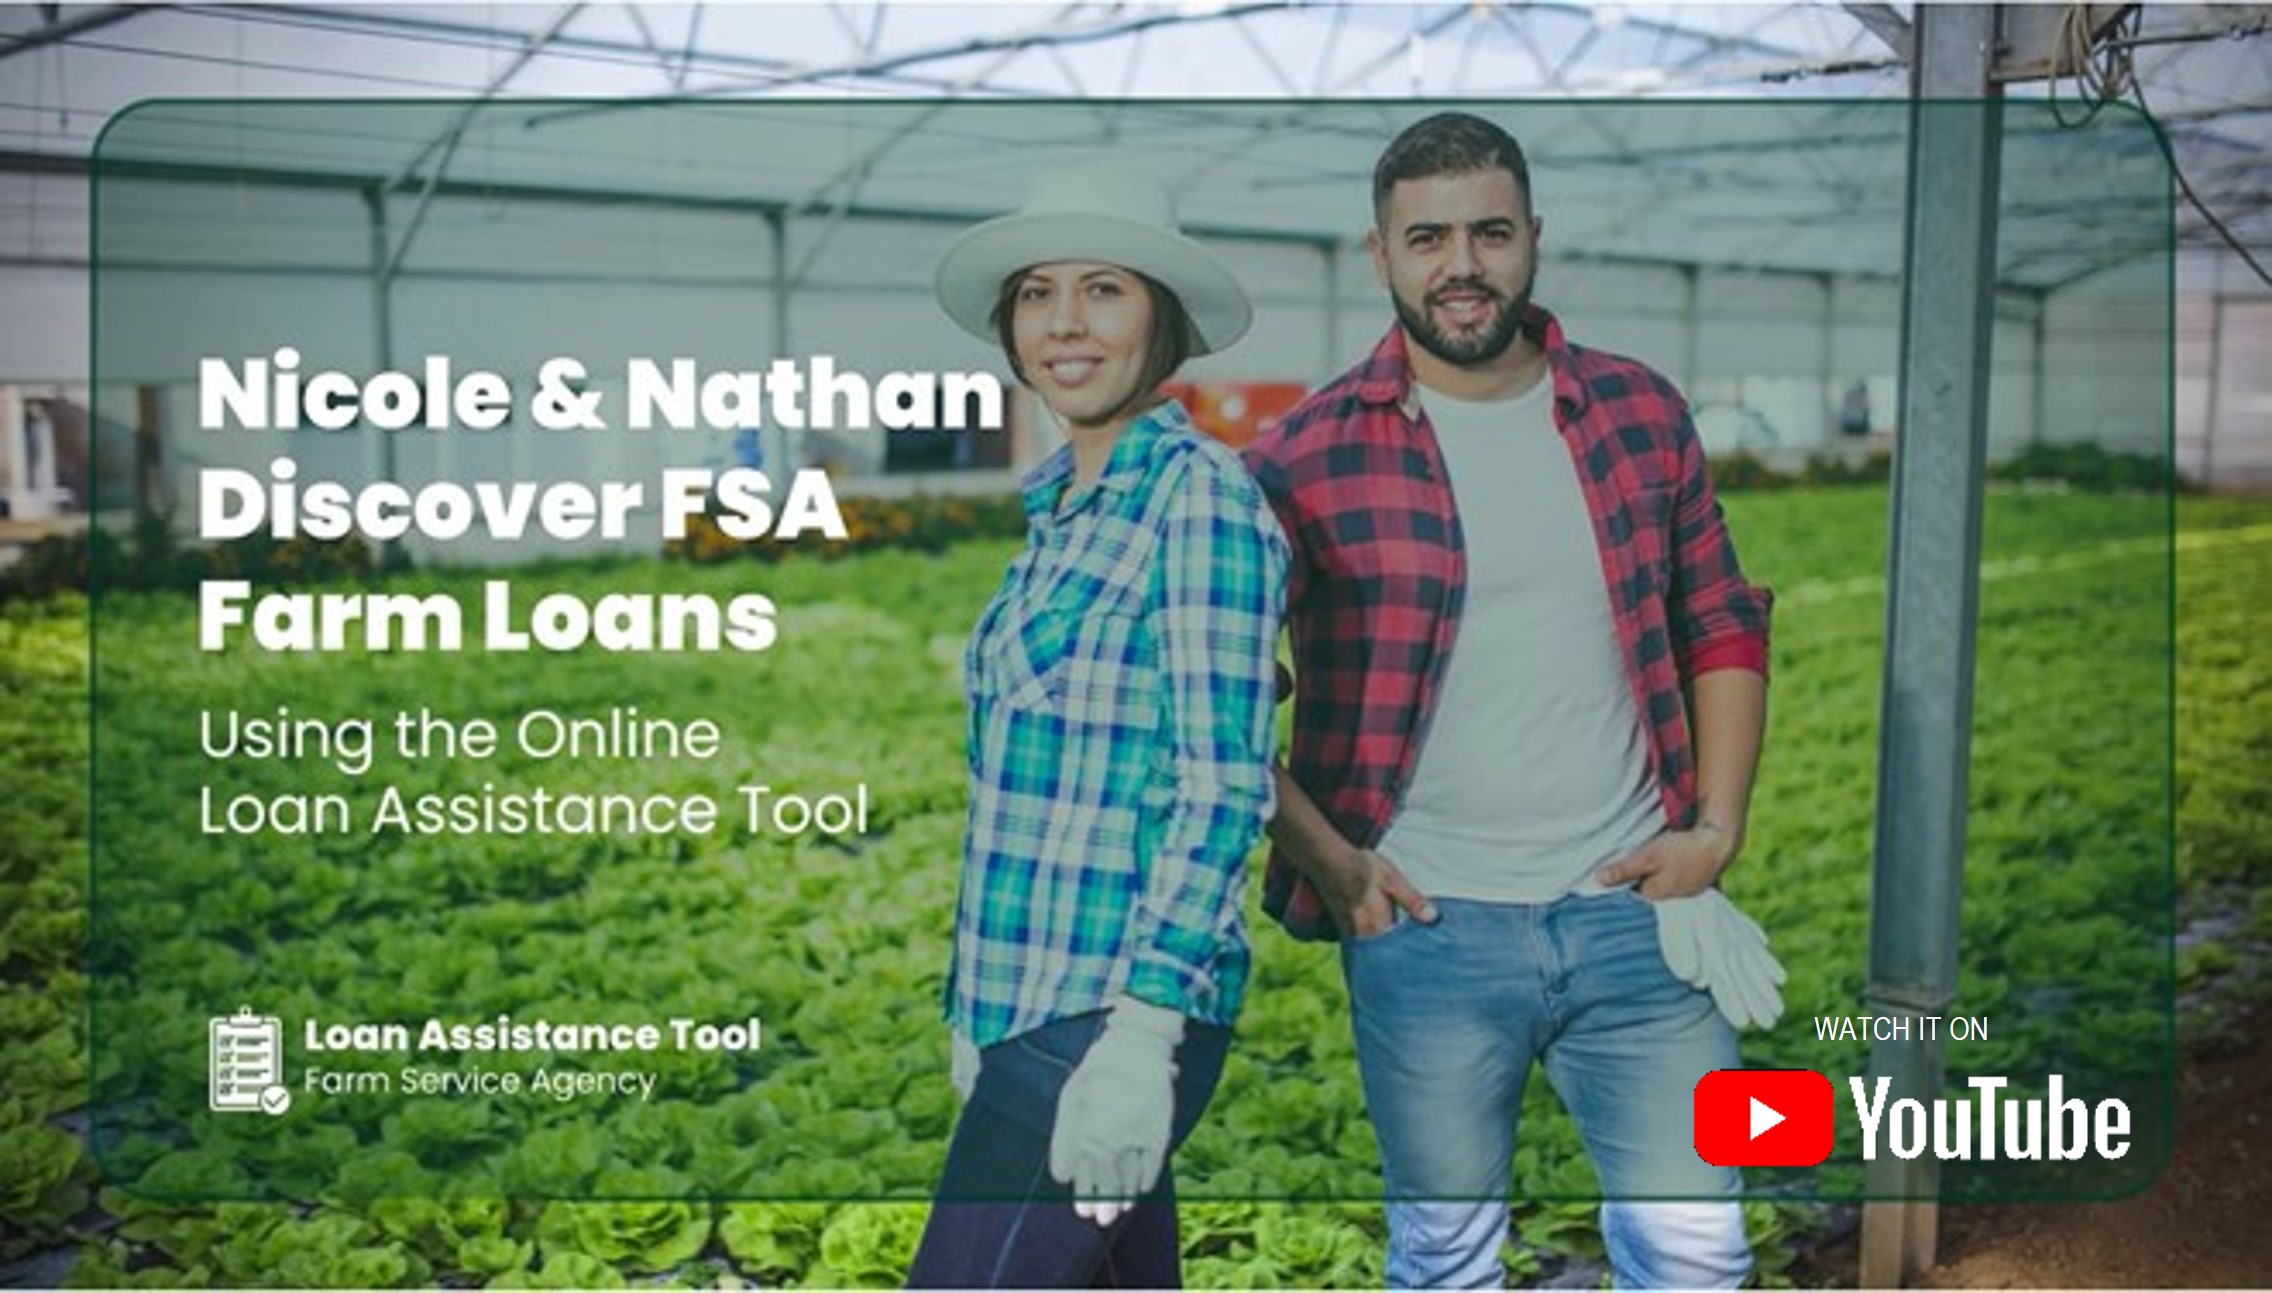 Nicole and Nathan Discover FSA Farm Loans Video Link